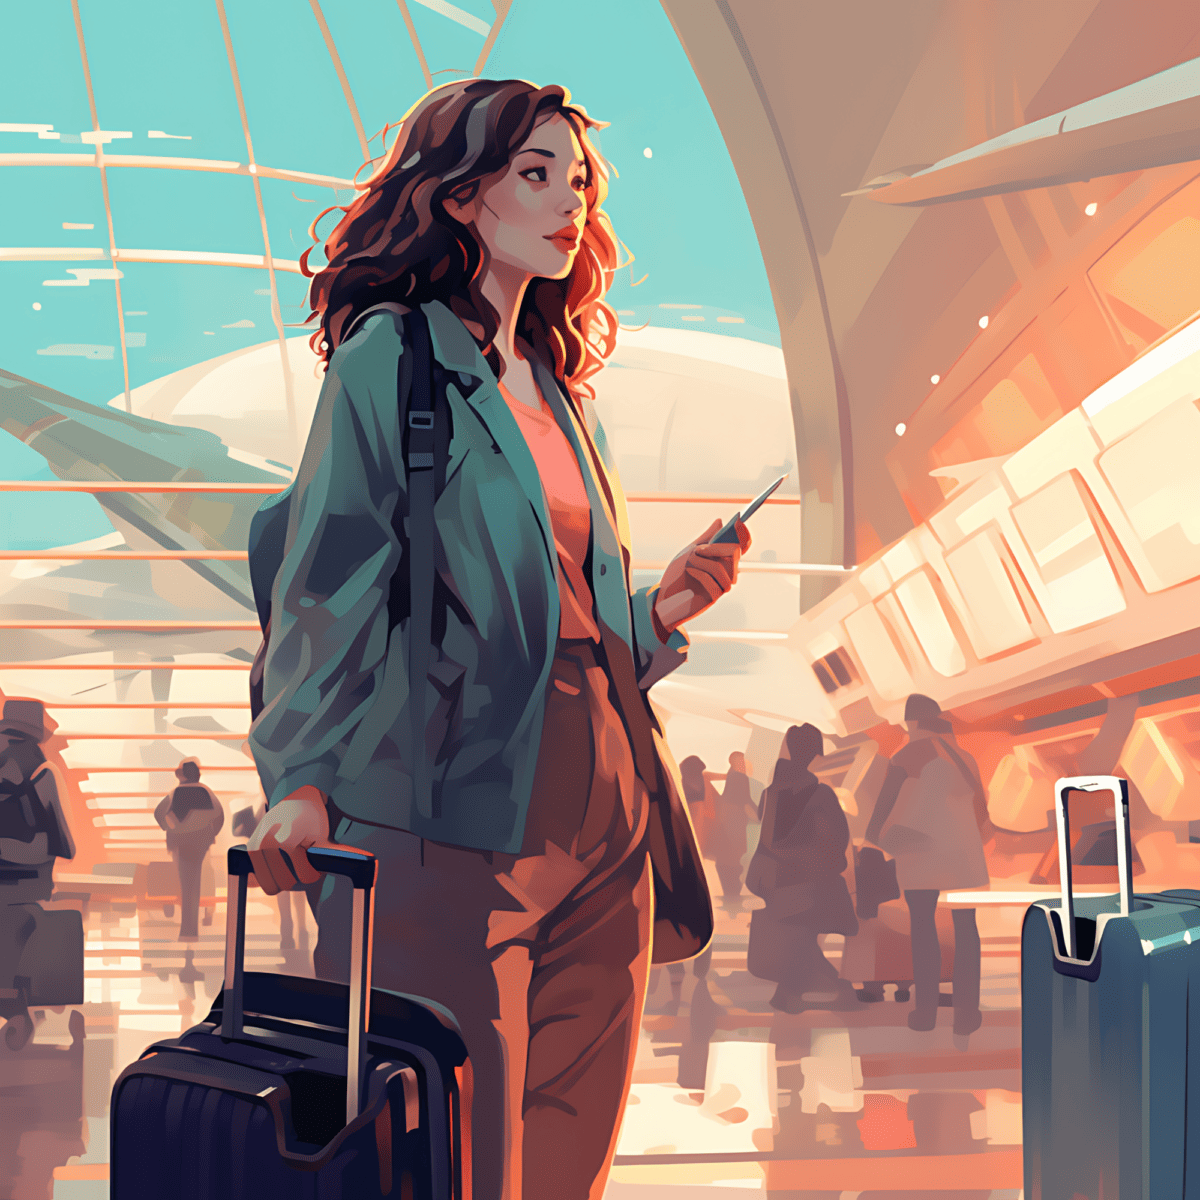 the woman is about to board the plane